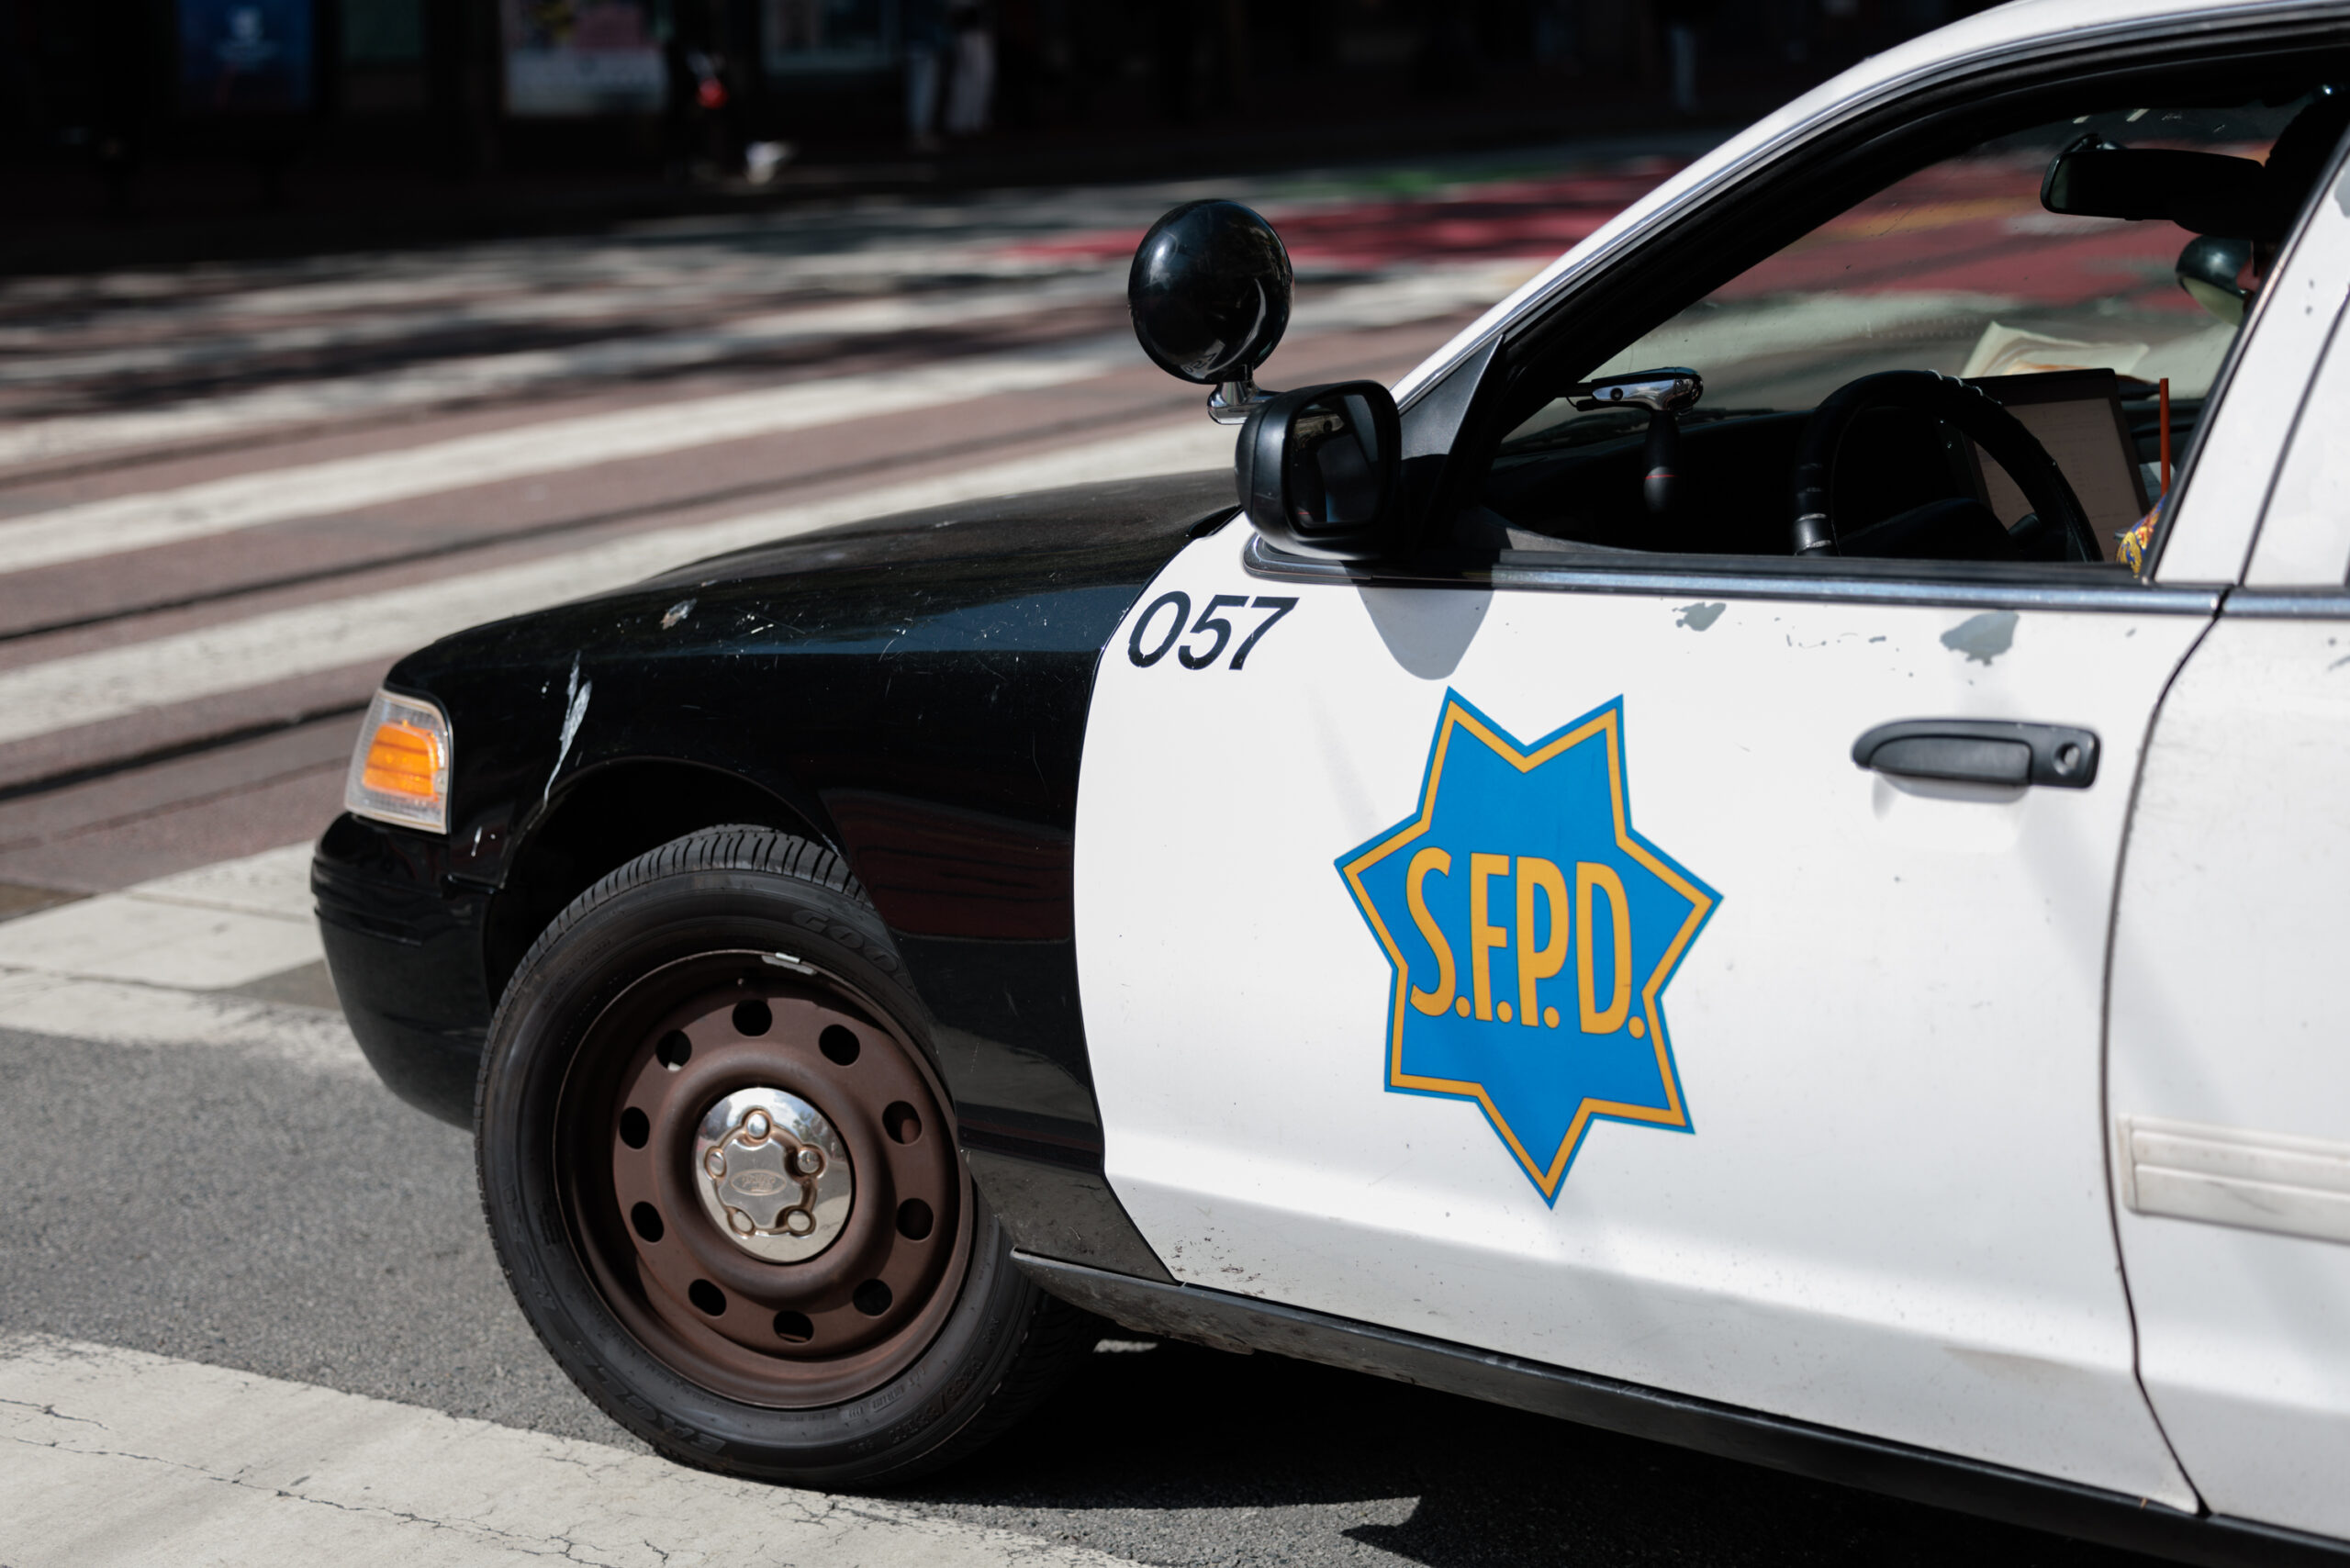 Suspected Illegal Firearms Seized From 19-Year-Old, San Francisco Police Say